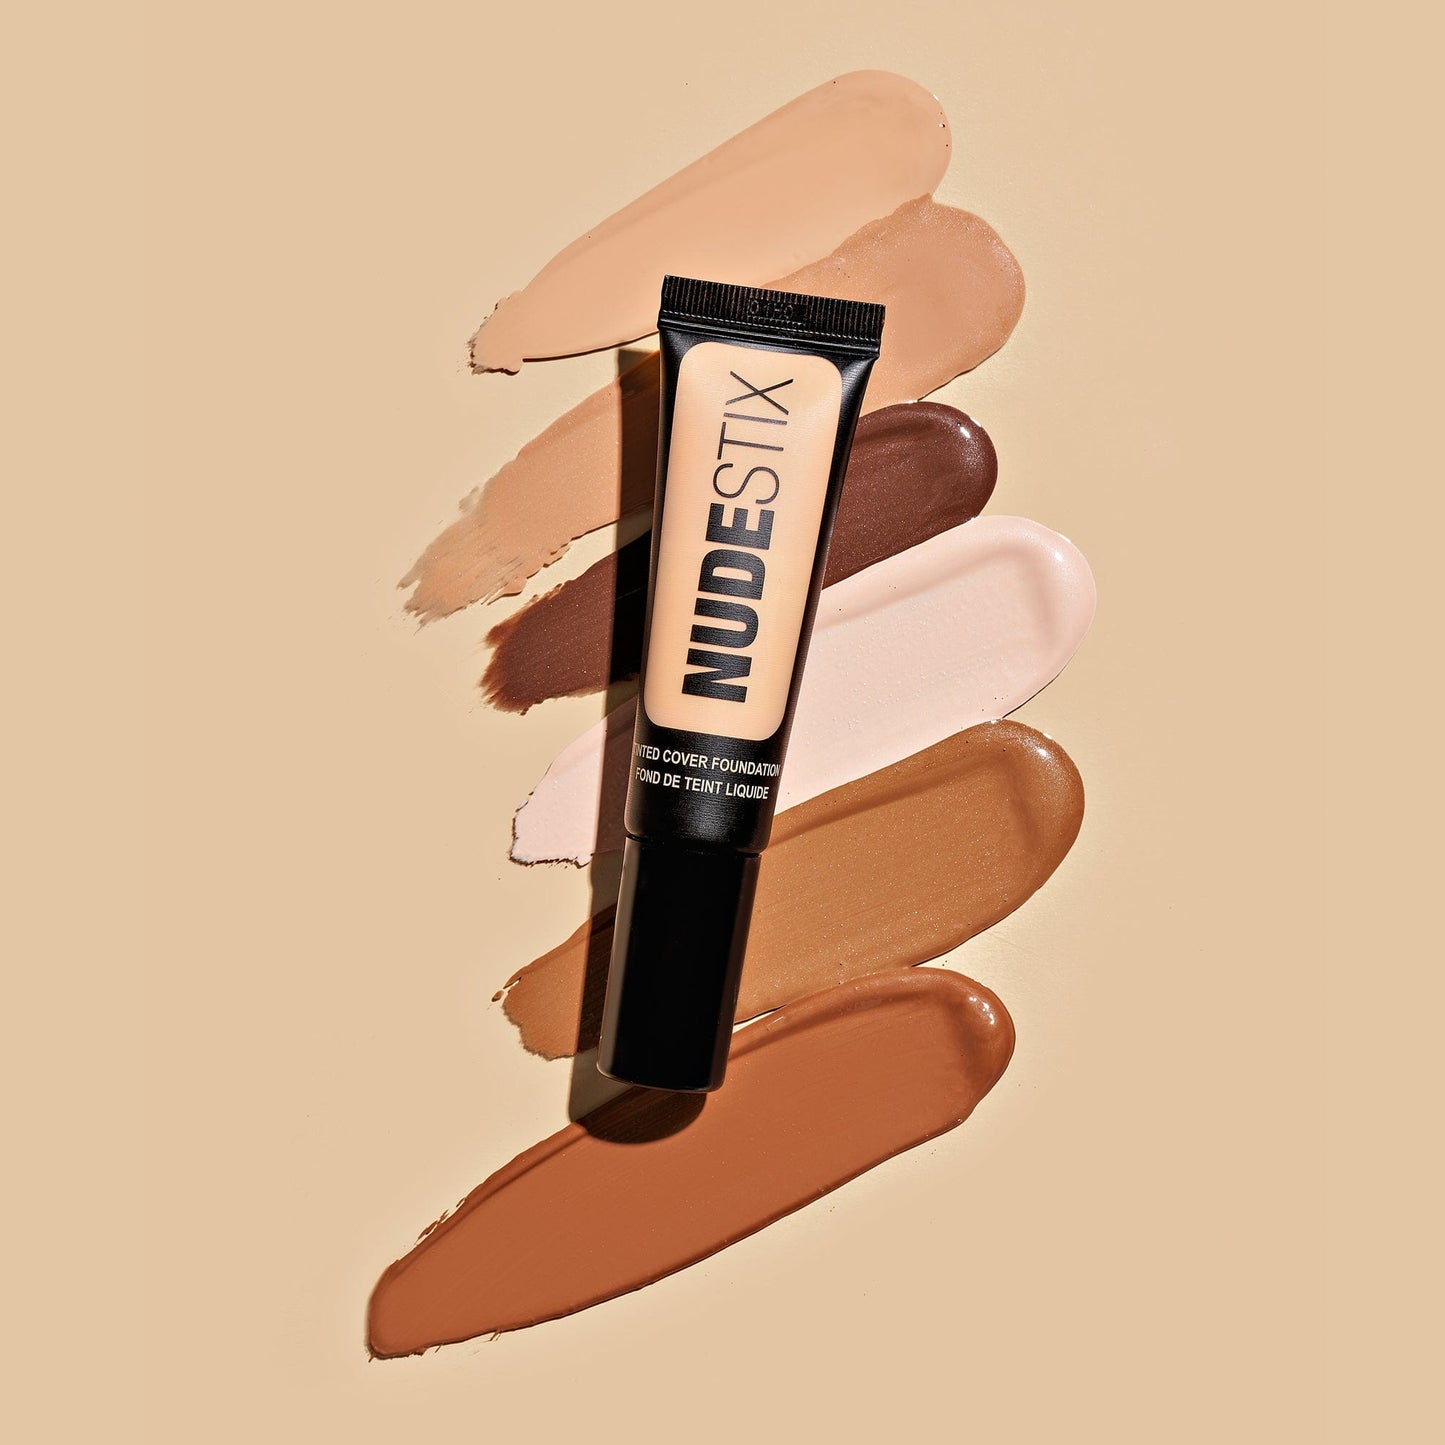 Tinted Cover Liquid Foundation in shade Nude 2.5 with texture swatches behind